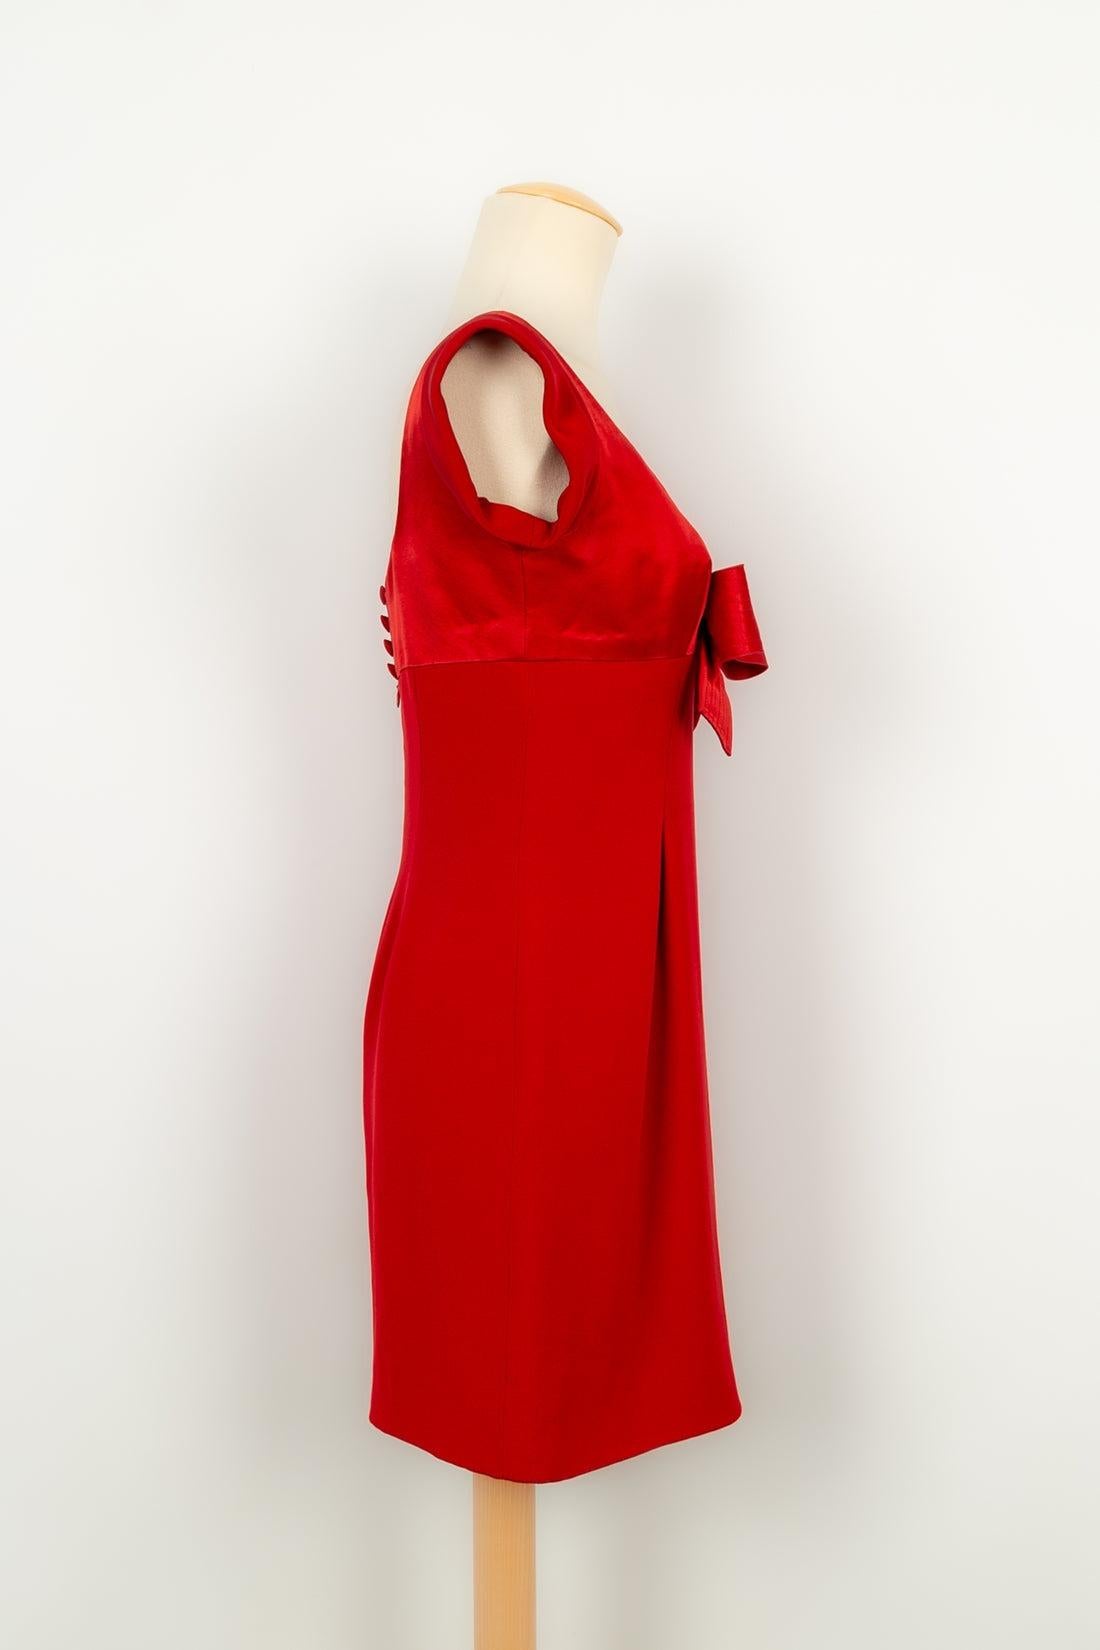 Christian Lacroix - Haute Couture dress in red silk, with a silk lining. No size indicated, it fits a 38FR/40FR. Dress seen on Lady Diana in September 1995 at the Petit Palais in Paris.

Additional information:
Condition: Very good